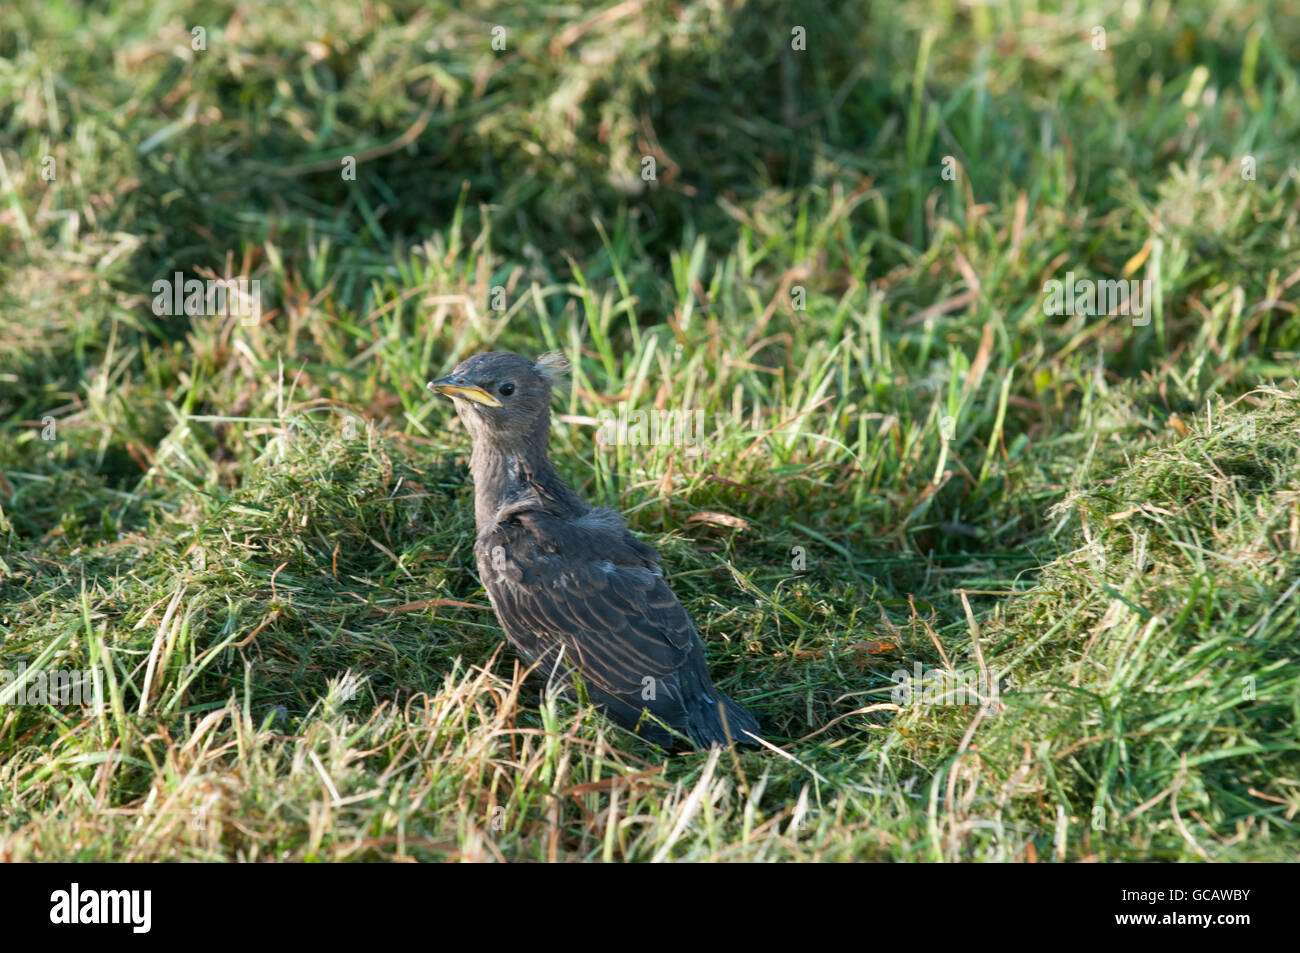 Baby bird in grass, lost and trying to find nest and mother Stock Photo